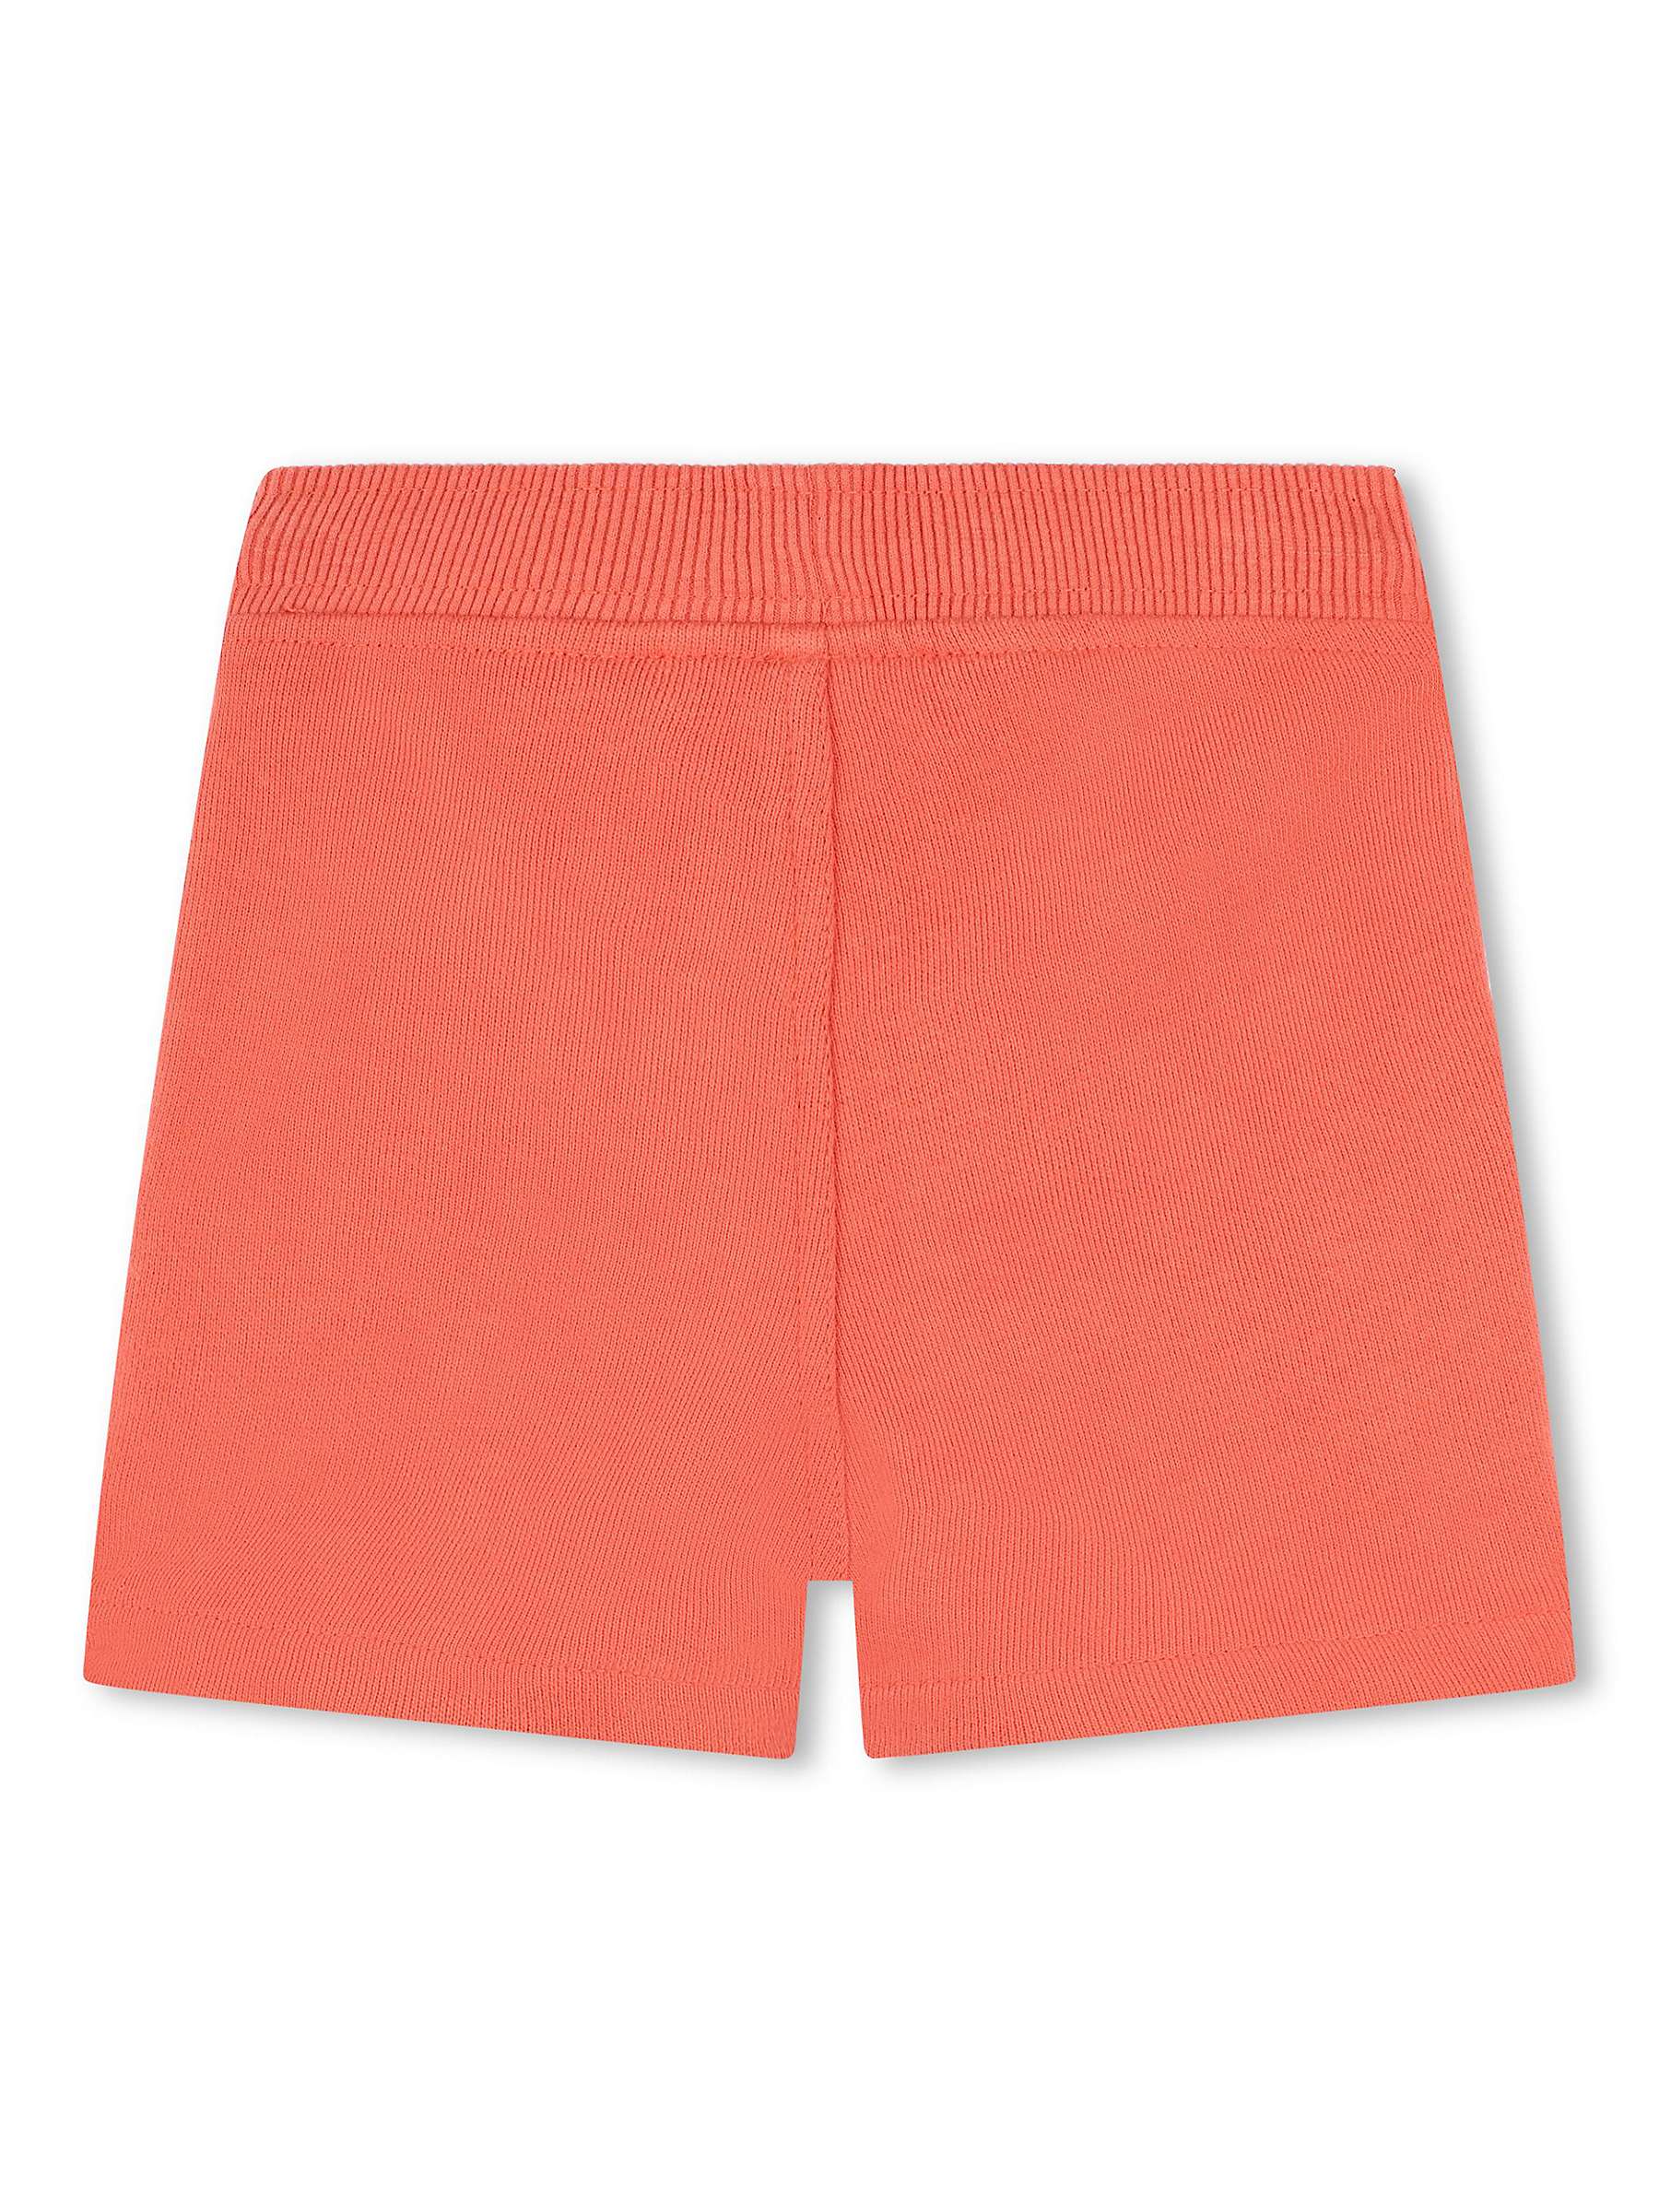 Buy Timberland Baby French Terry Track Bermuda Shorts Online at johnlewis.com